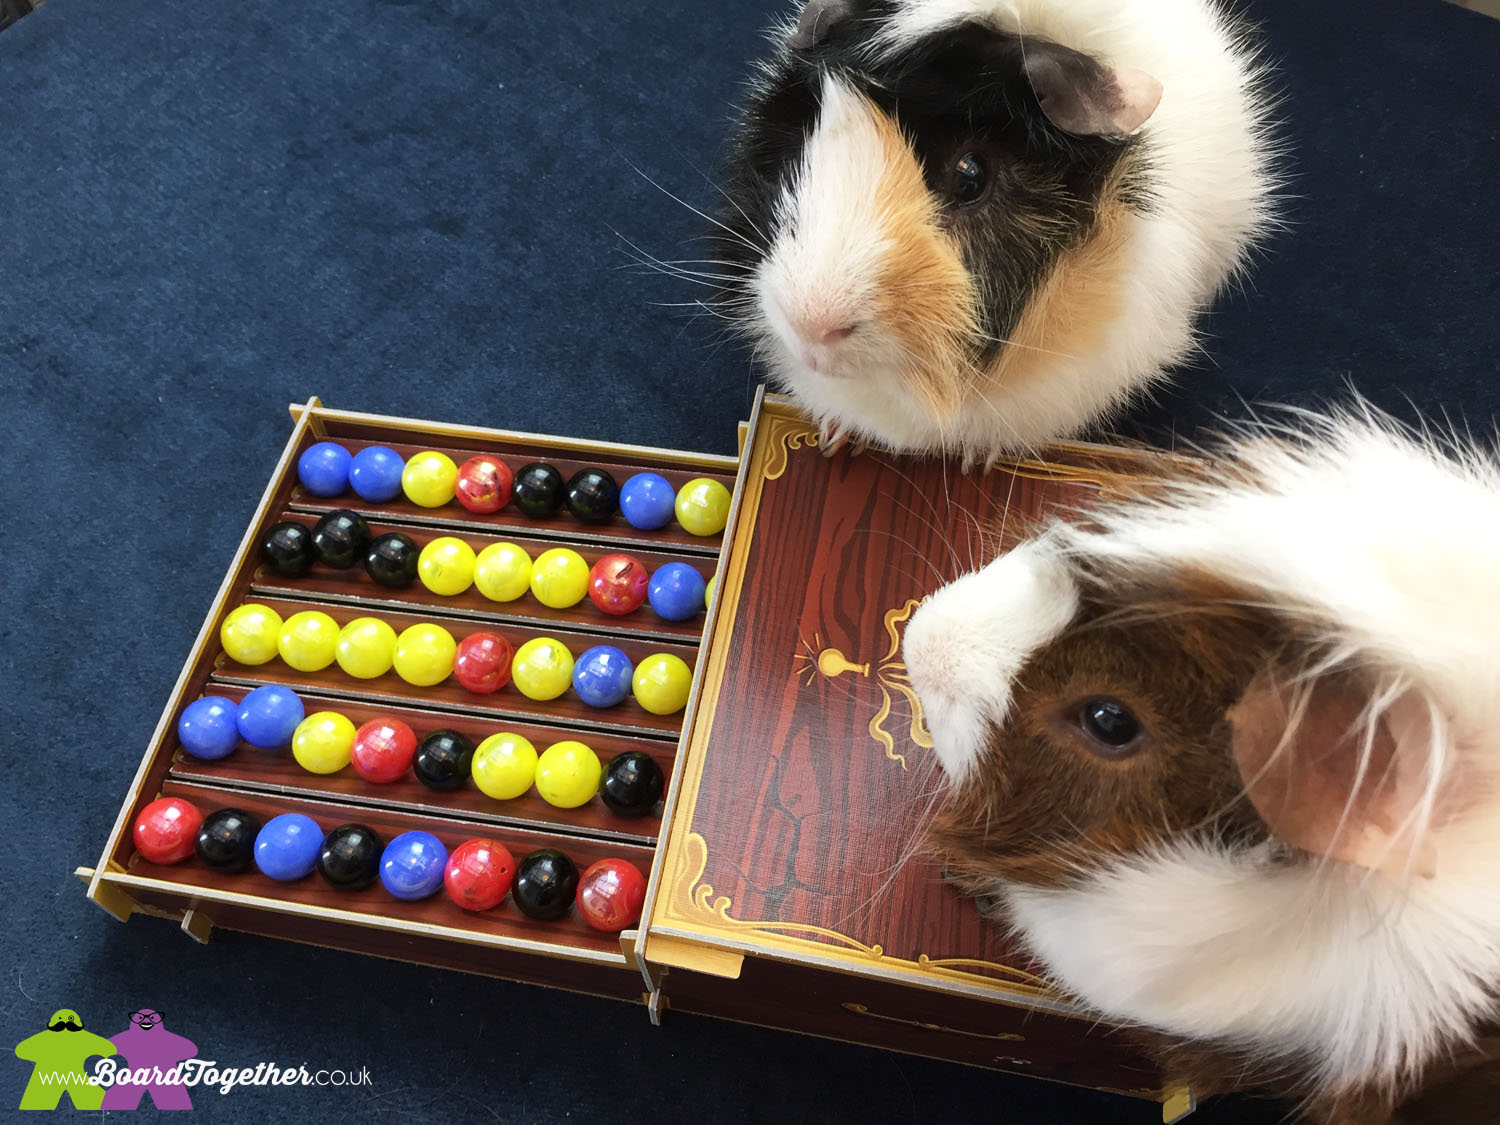 Scampi & Buddy with the boardgame Potion Explosion